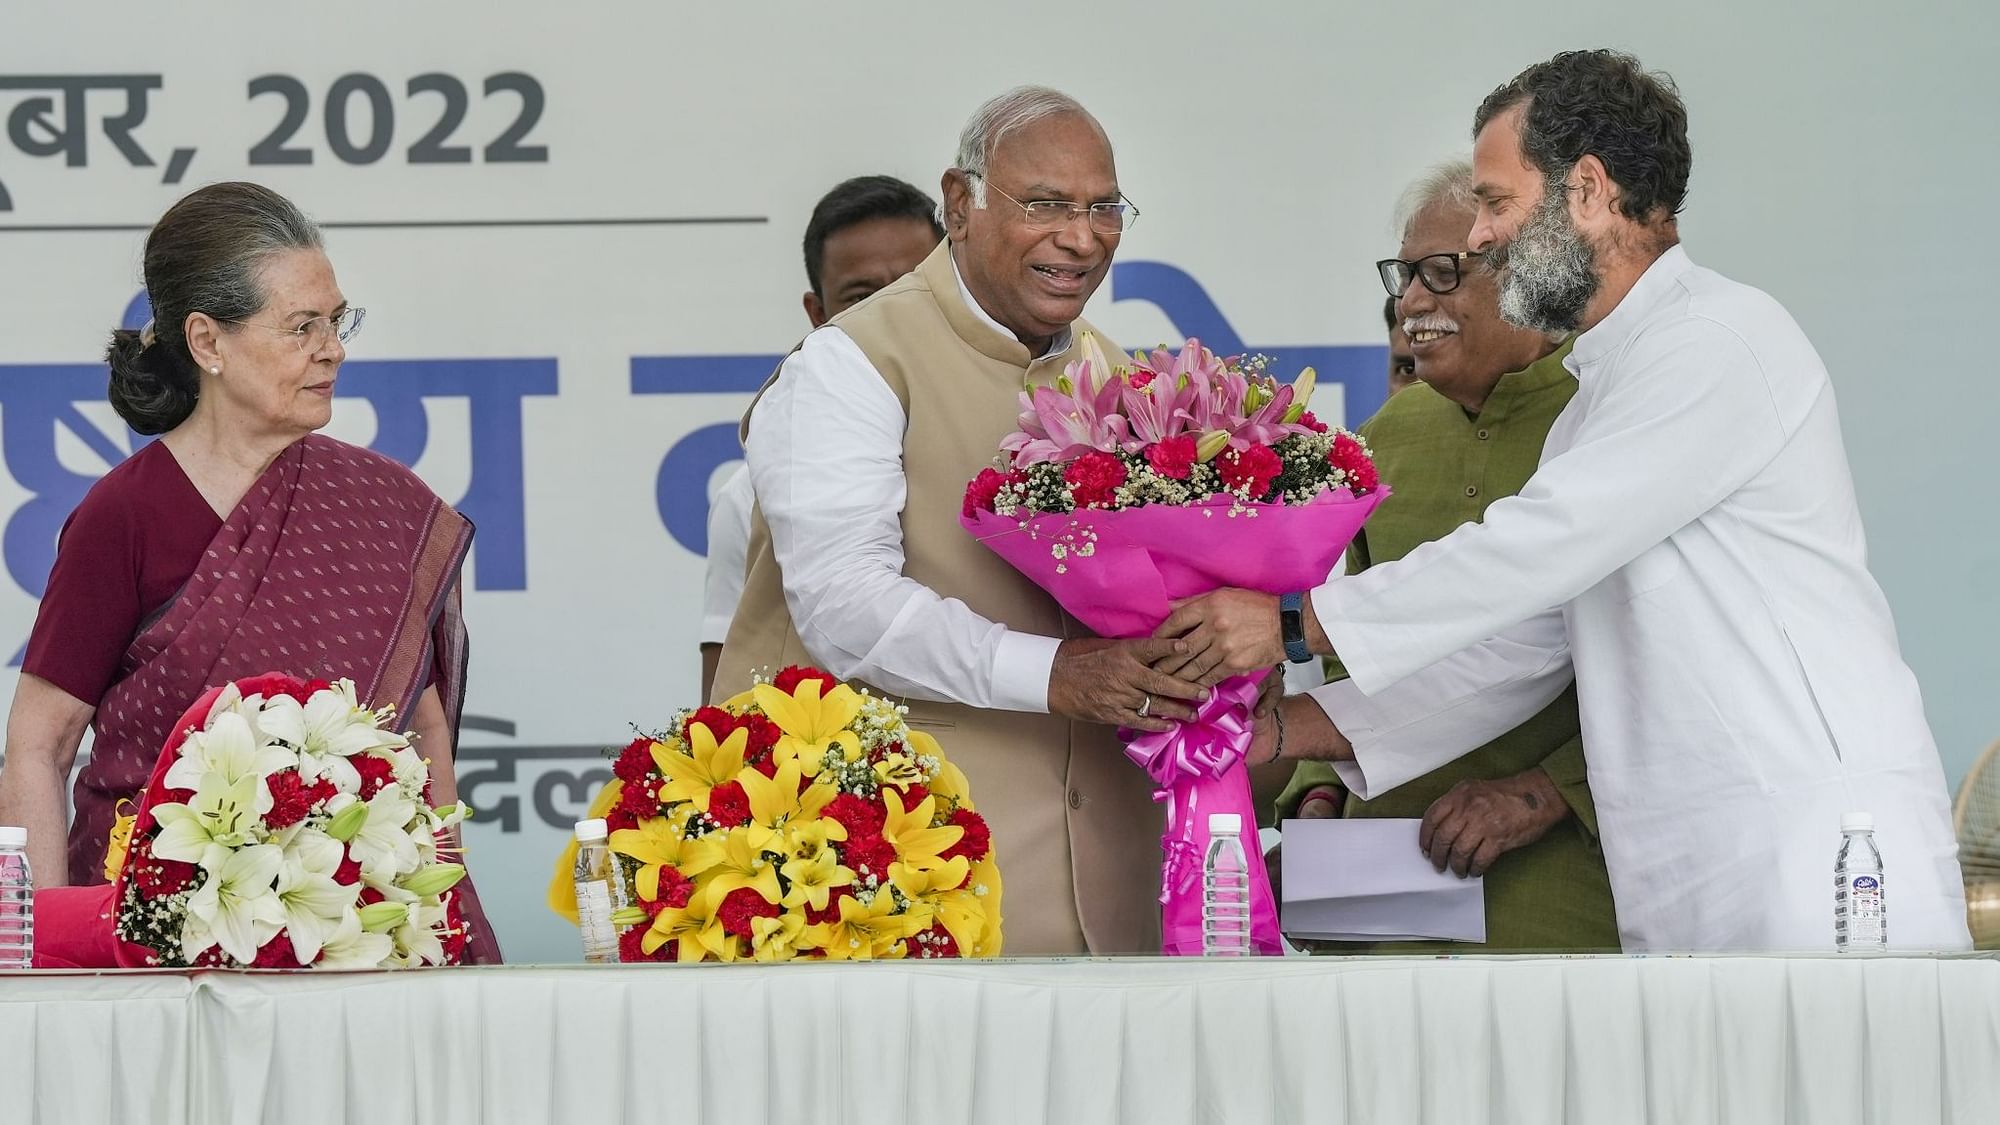 <div class="paragraphs"><p>Rahul Gandhi presenting new Congress chief Mallikarjun Kharge with a bouquet at the AICC headquarters on Wednesday, 26 October, in the presence of Sonia Gandhi.&nbsp;</p></div>